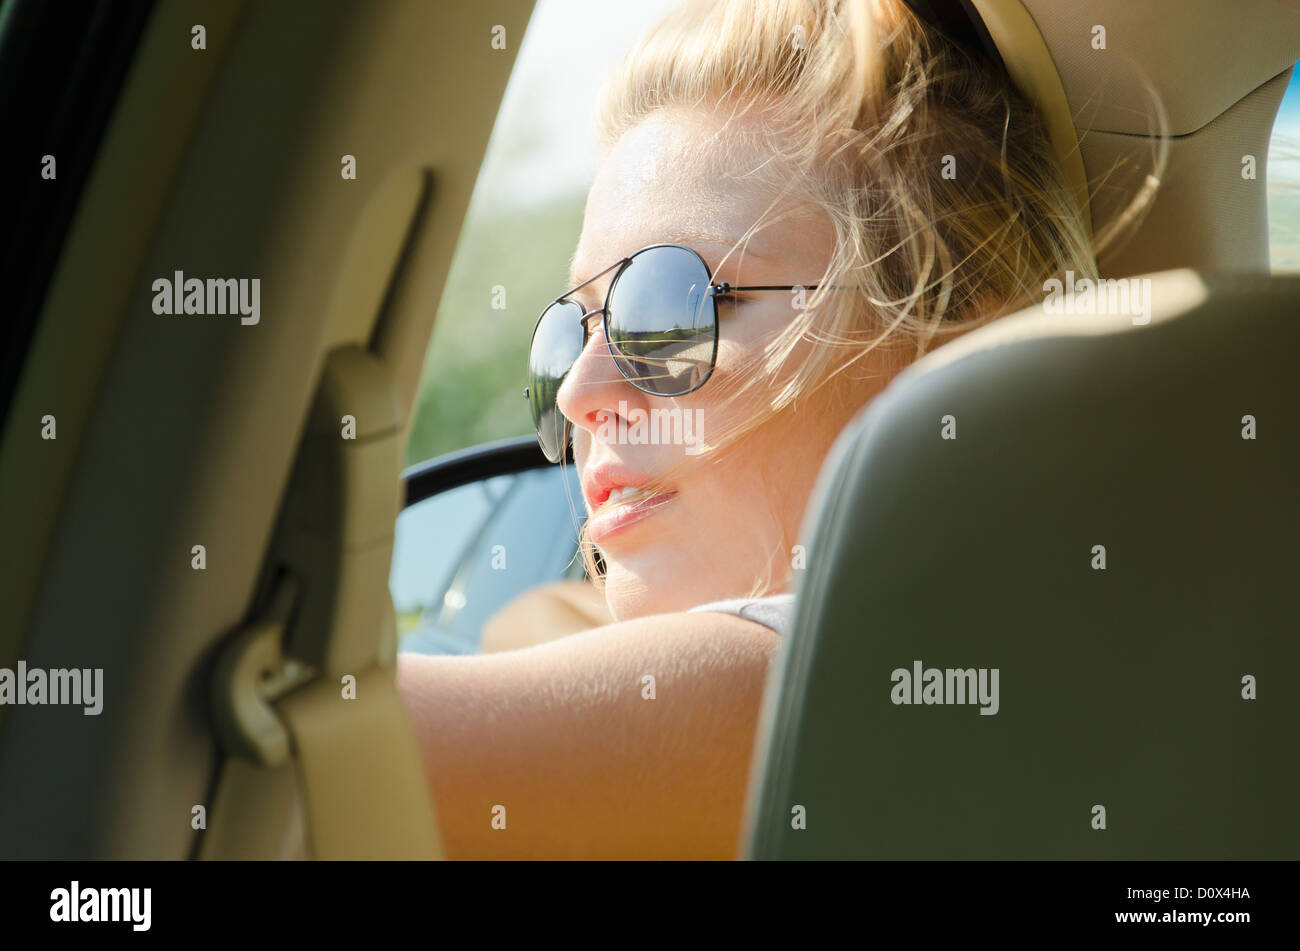 Close up portrait of blond female driver with sunglasses Stock Photo